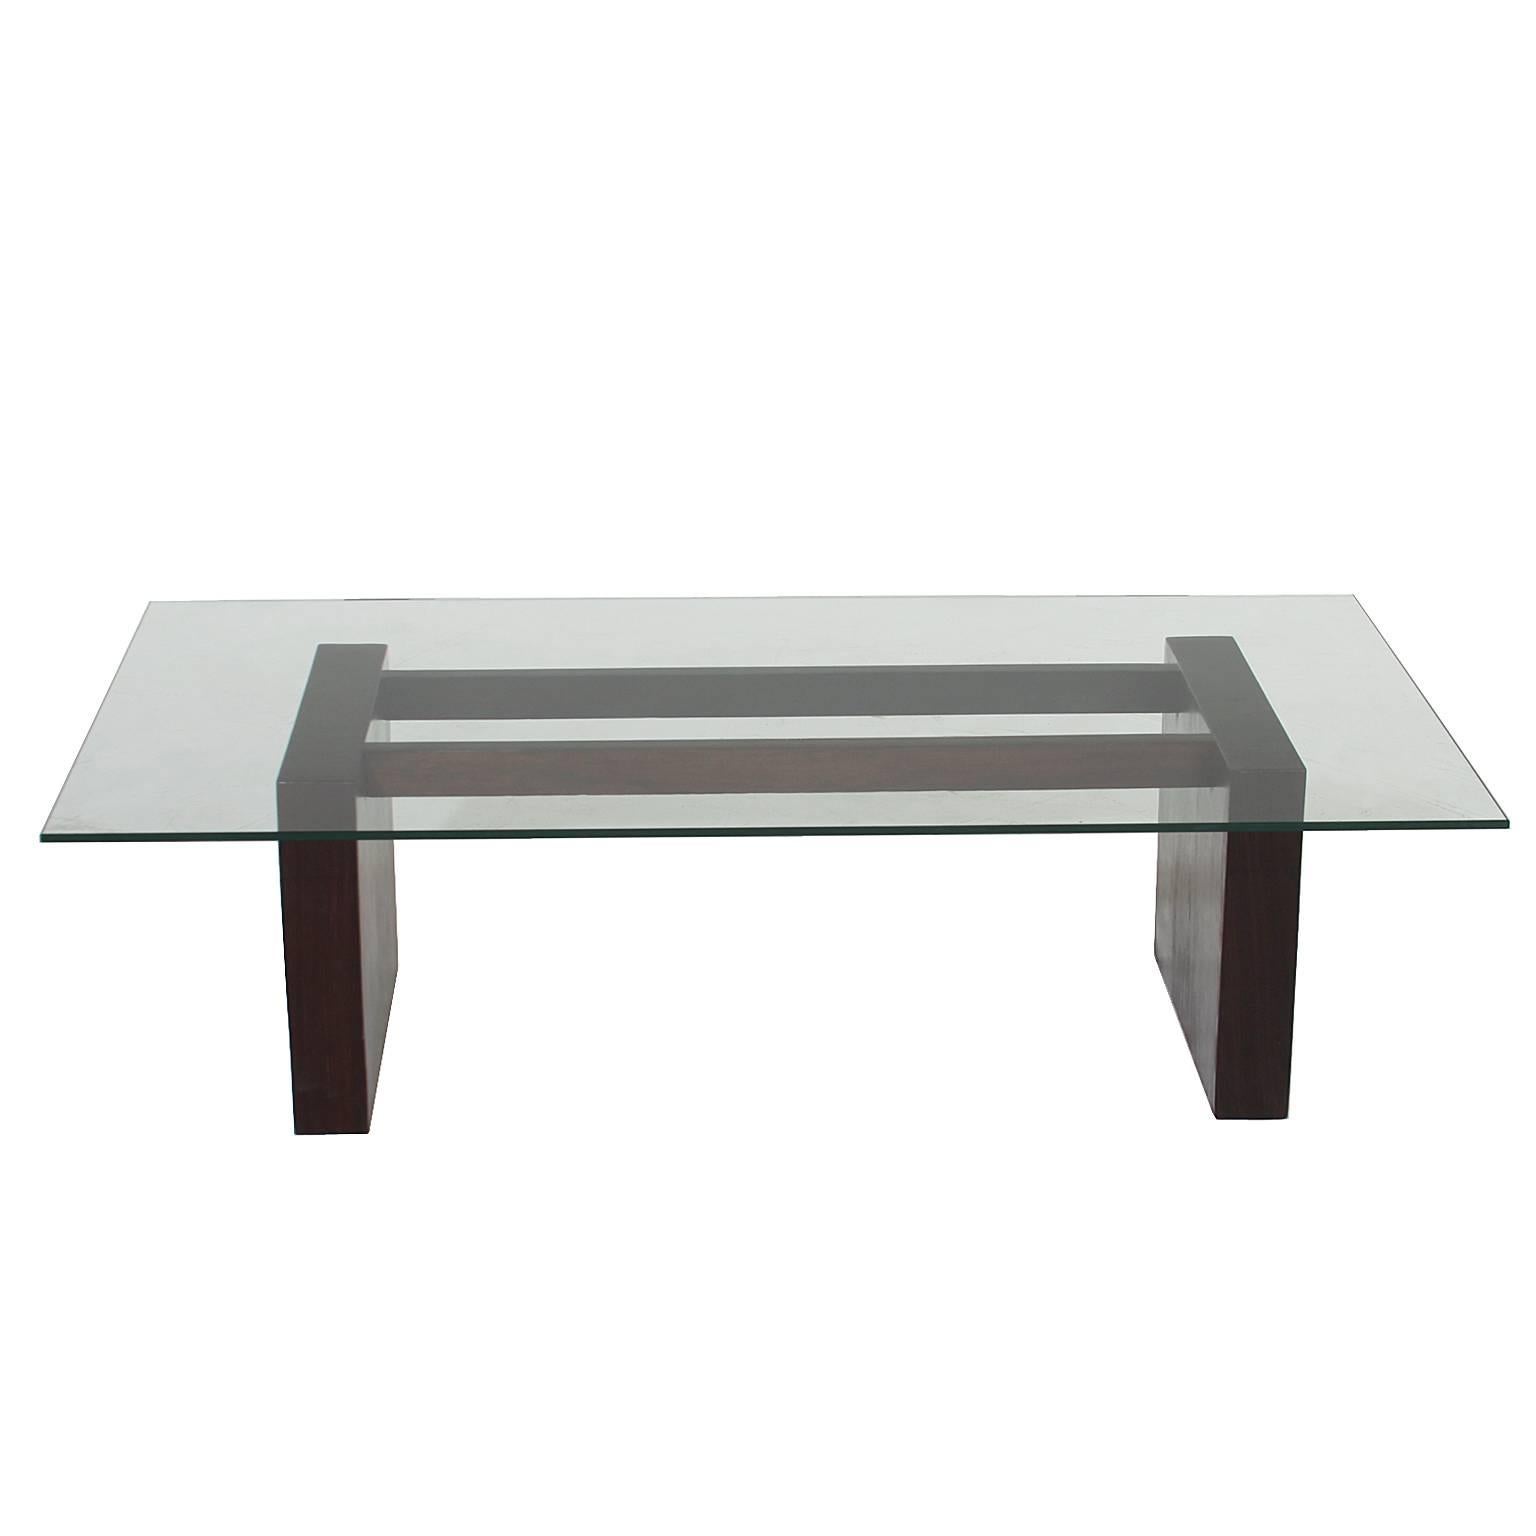 A simple coffee table with a rosewood base. The base has two stretchers along the top and two thick bases on either side of the stretcher. It creates a dynamic look to a simple coffee table. The top is clear glass. 

Many pieces are stored in our